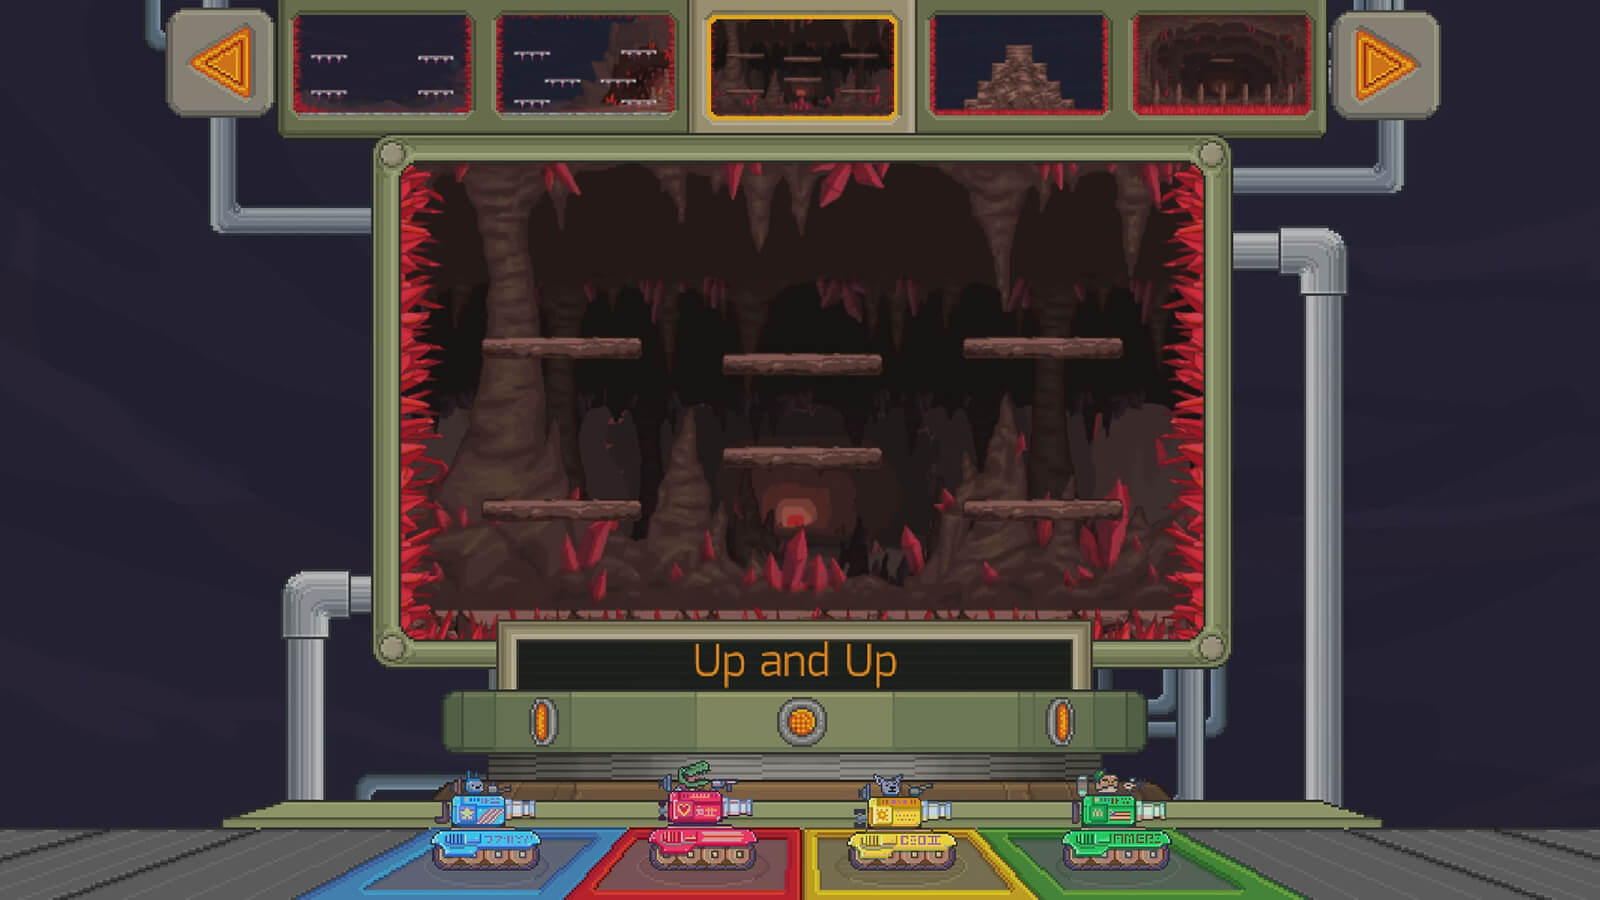 A green, yellow, blue and red tank stand at the level select screen.